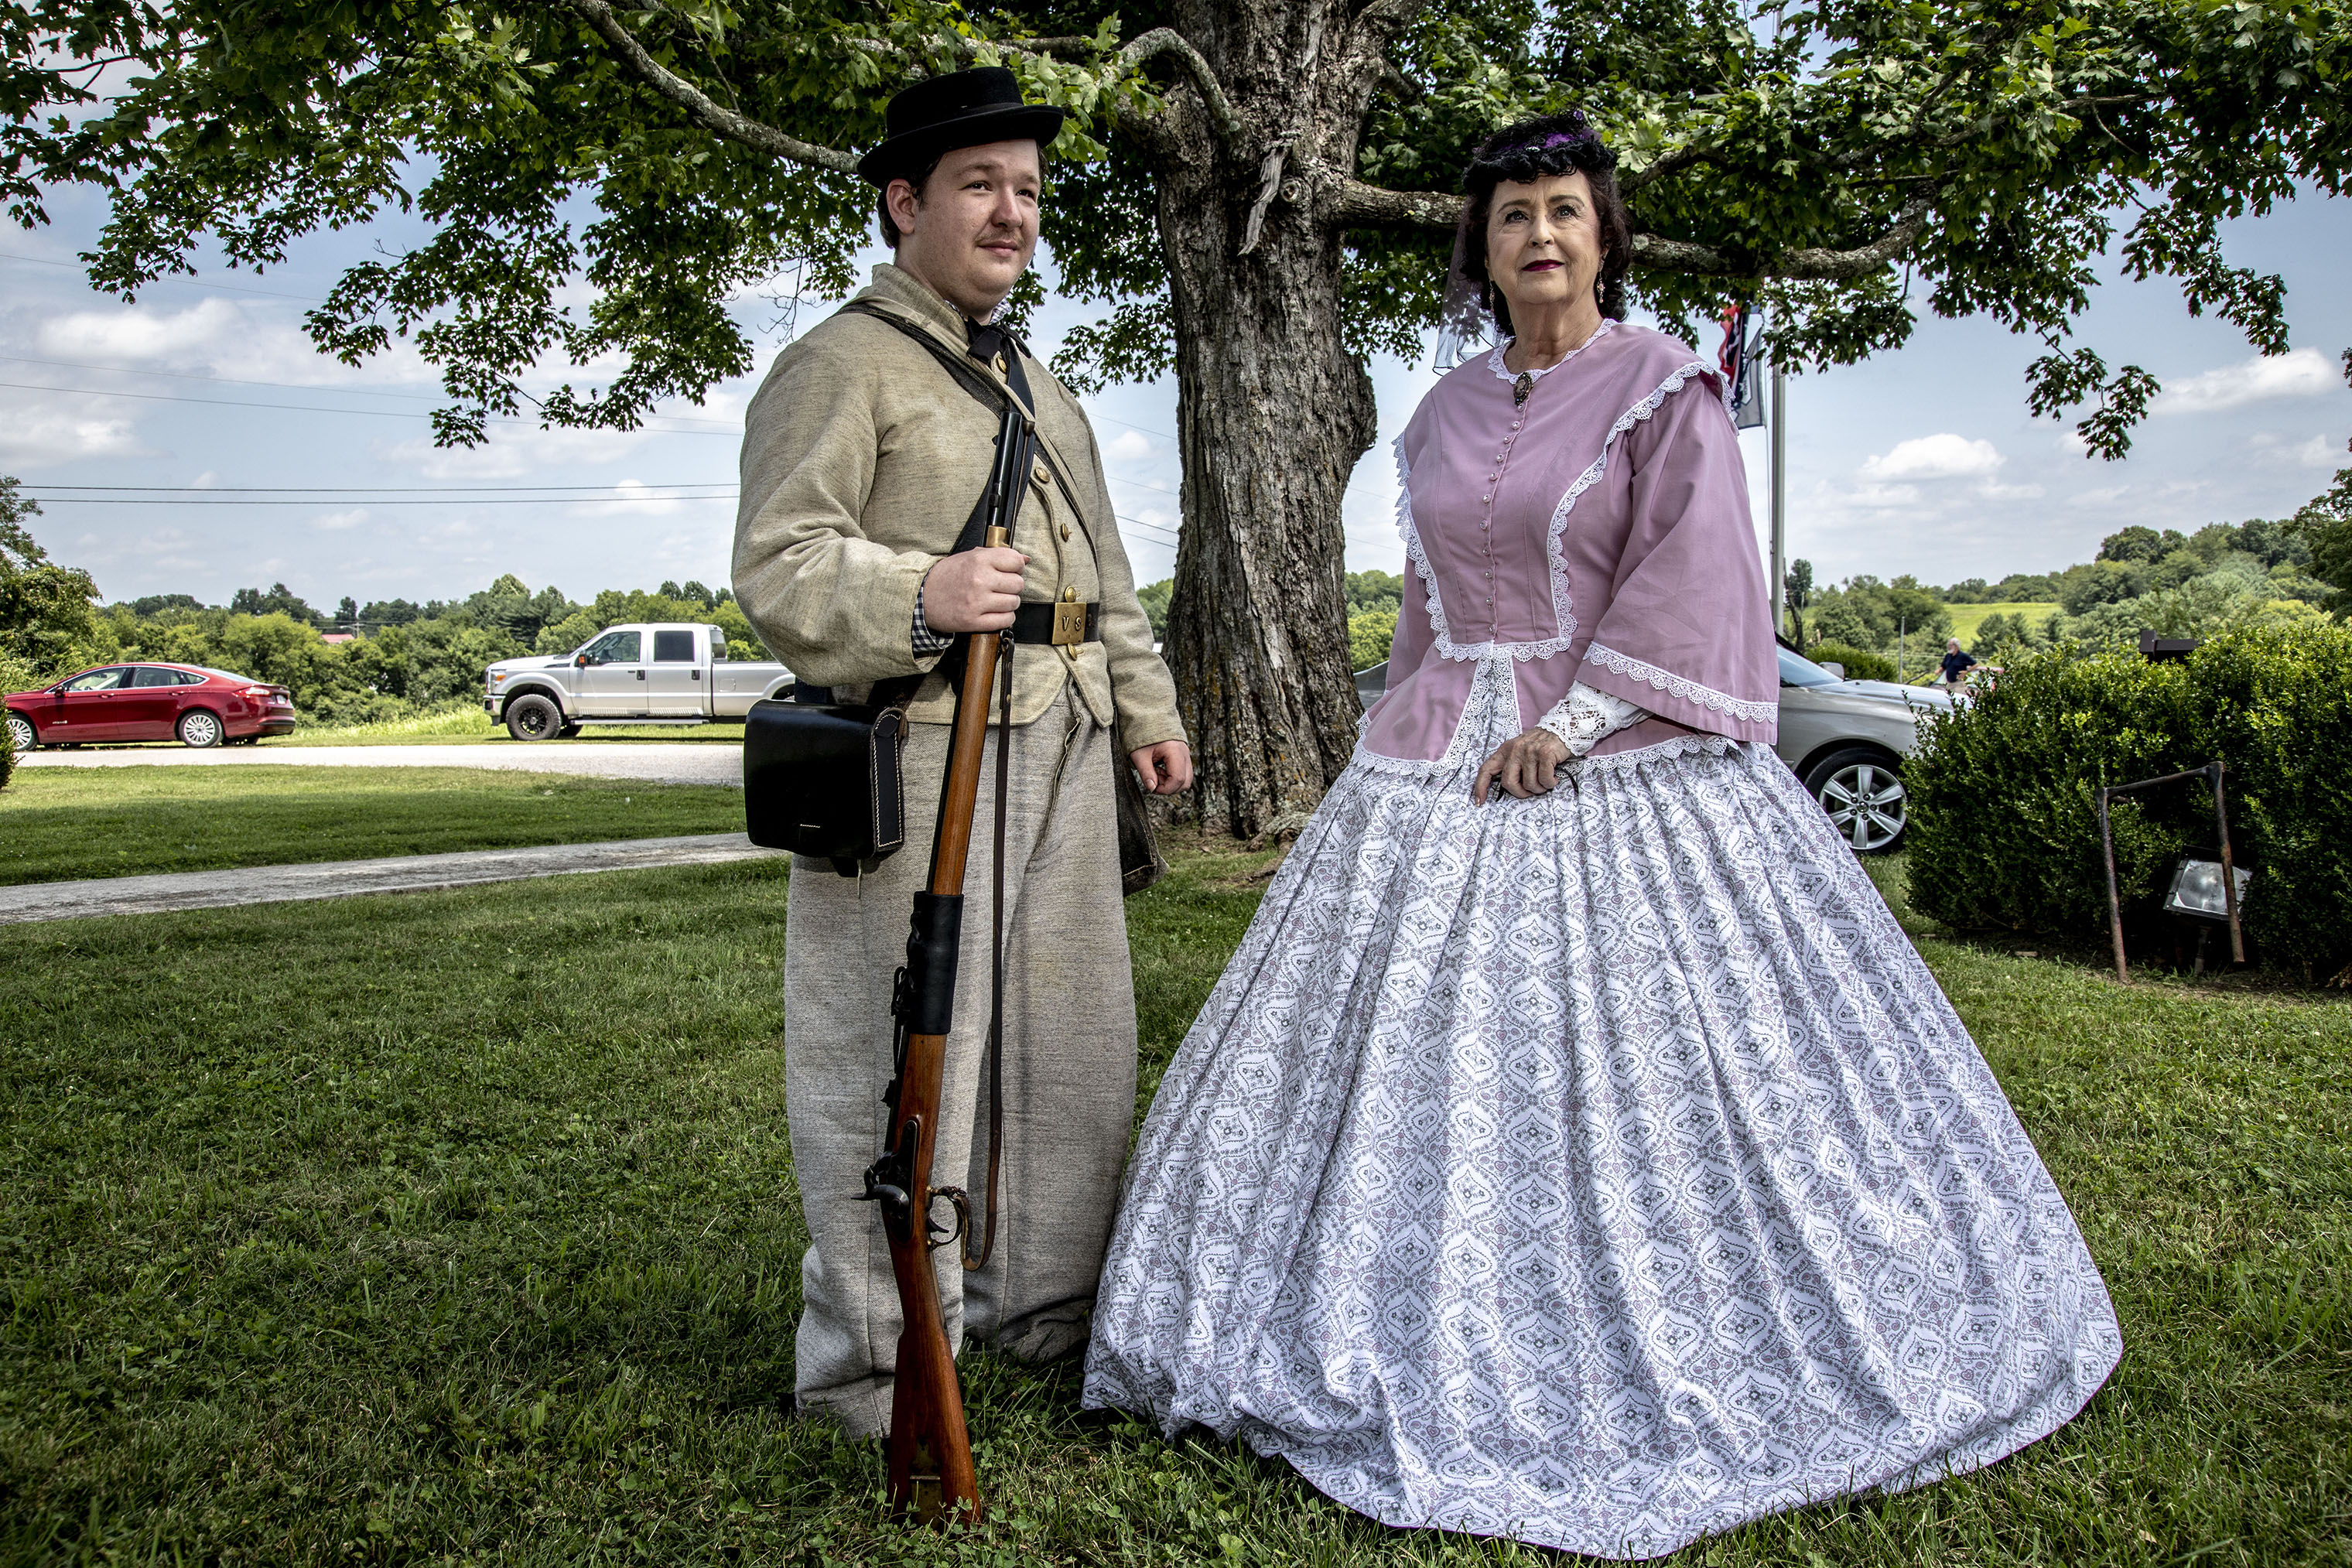 Reenactors of confederate soldiers and wives attend the dedication of the National Confederate Museum in Elm Springs in Columbia, Tenn. on July 20. (Mark Peterson—Redux for TIME)